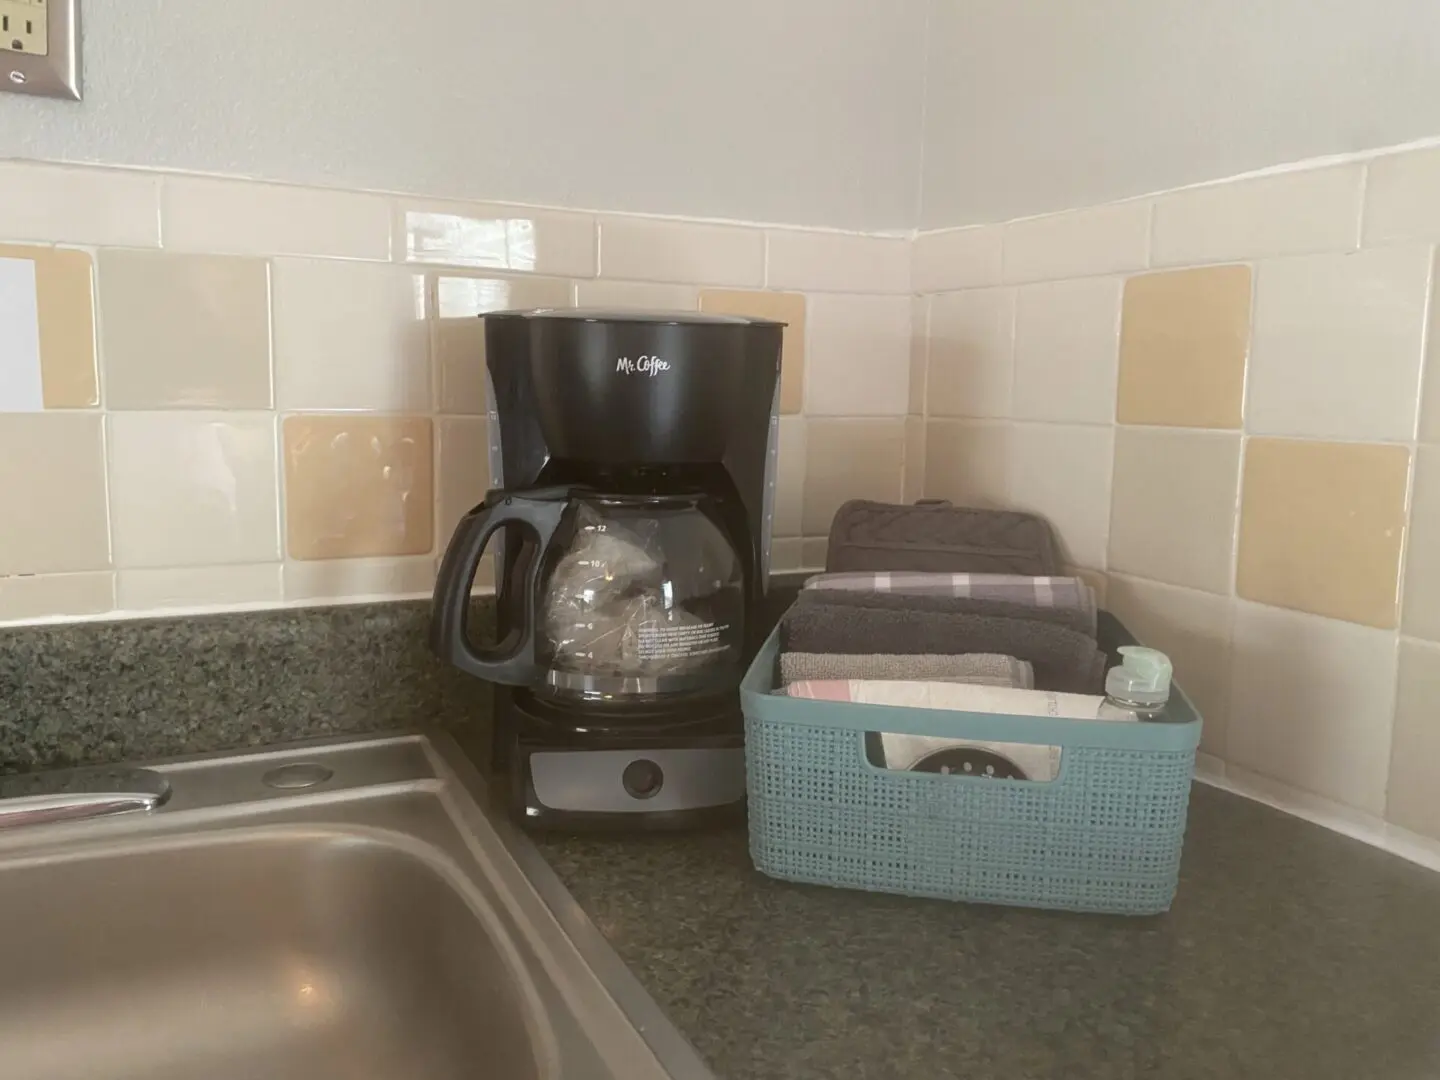 A coffee maker sitting on top of a counter.